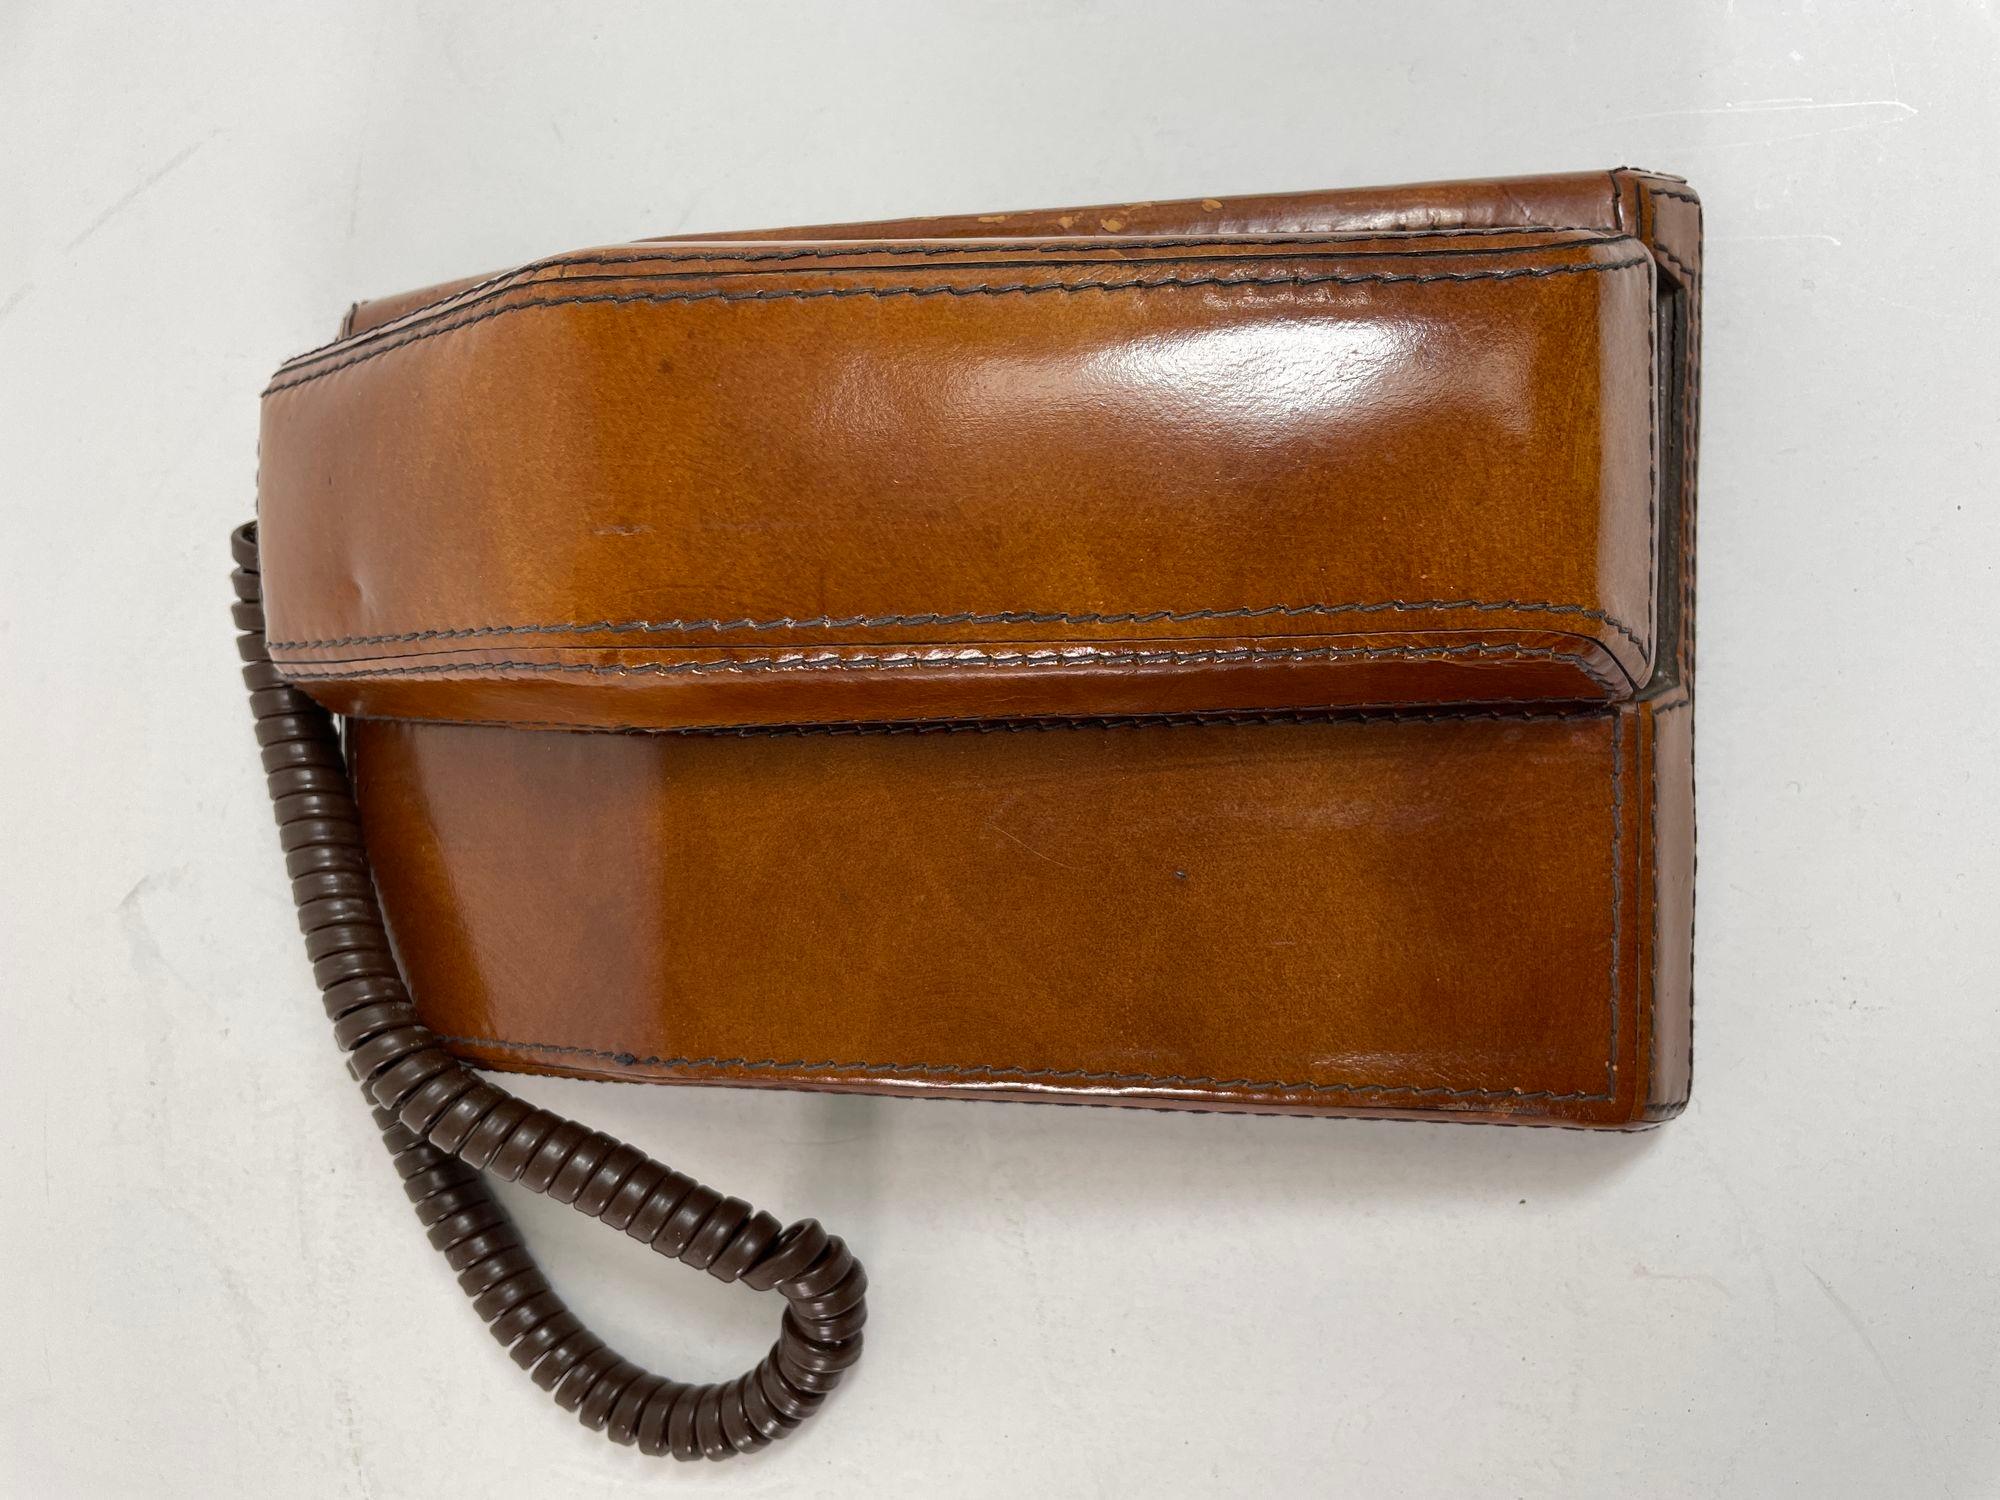 Vintage Brown Leather Covered and Hand-Stitched Telephone by Contempra, 1970s For Sale 2